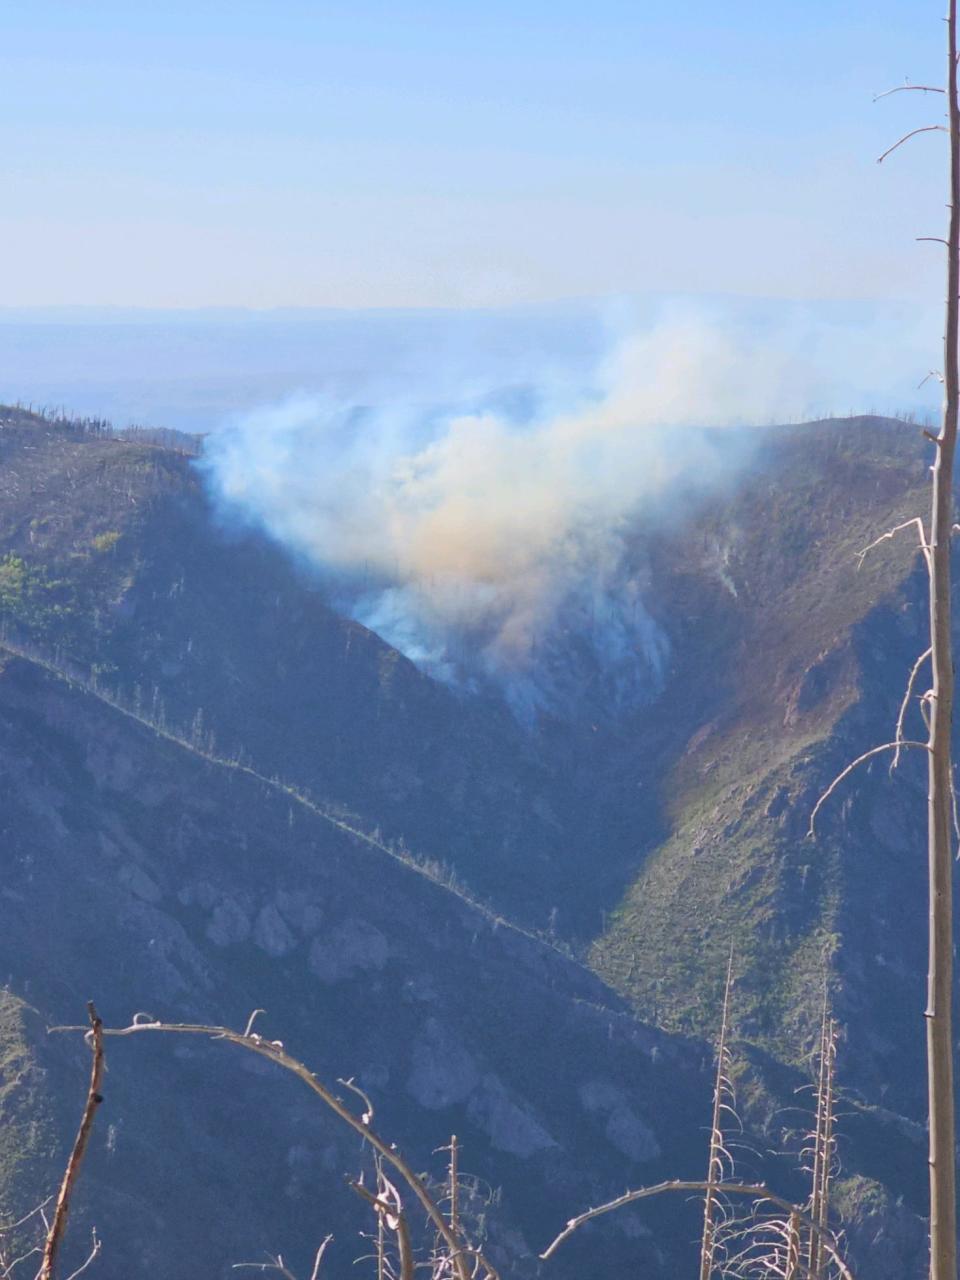 The Blue 2 fire that began on May 17 from a lightning strike continues in Ruidoso now exceeding 3,000 acres with 0% containment. The fire has prompted evacuations in Ruidoso and Capitan as it continues to grow.